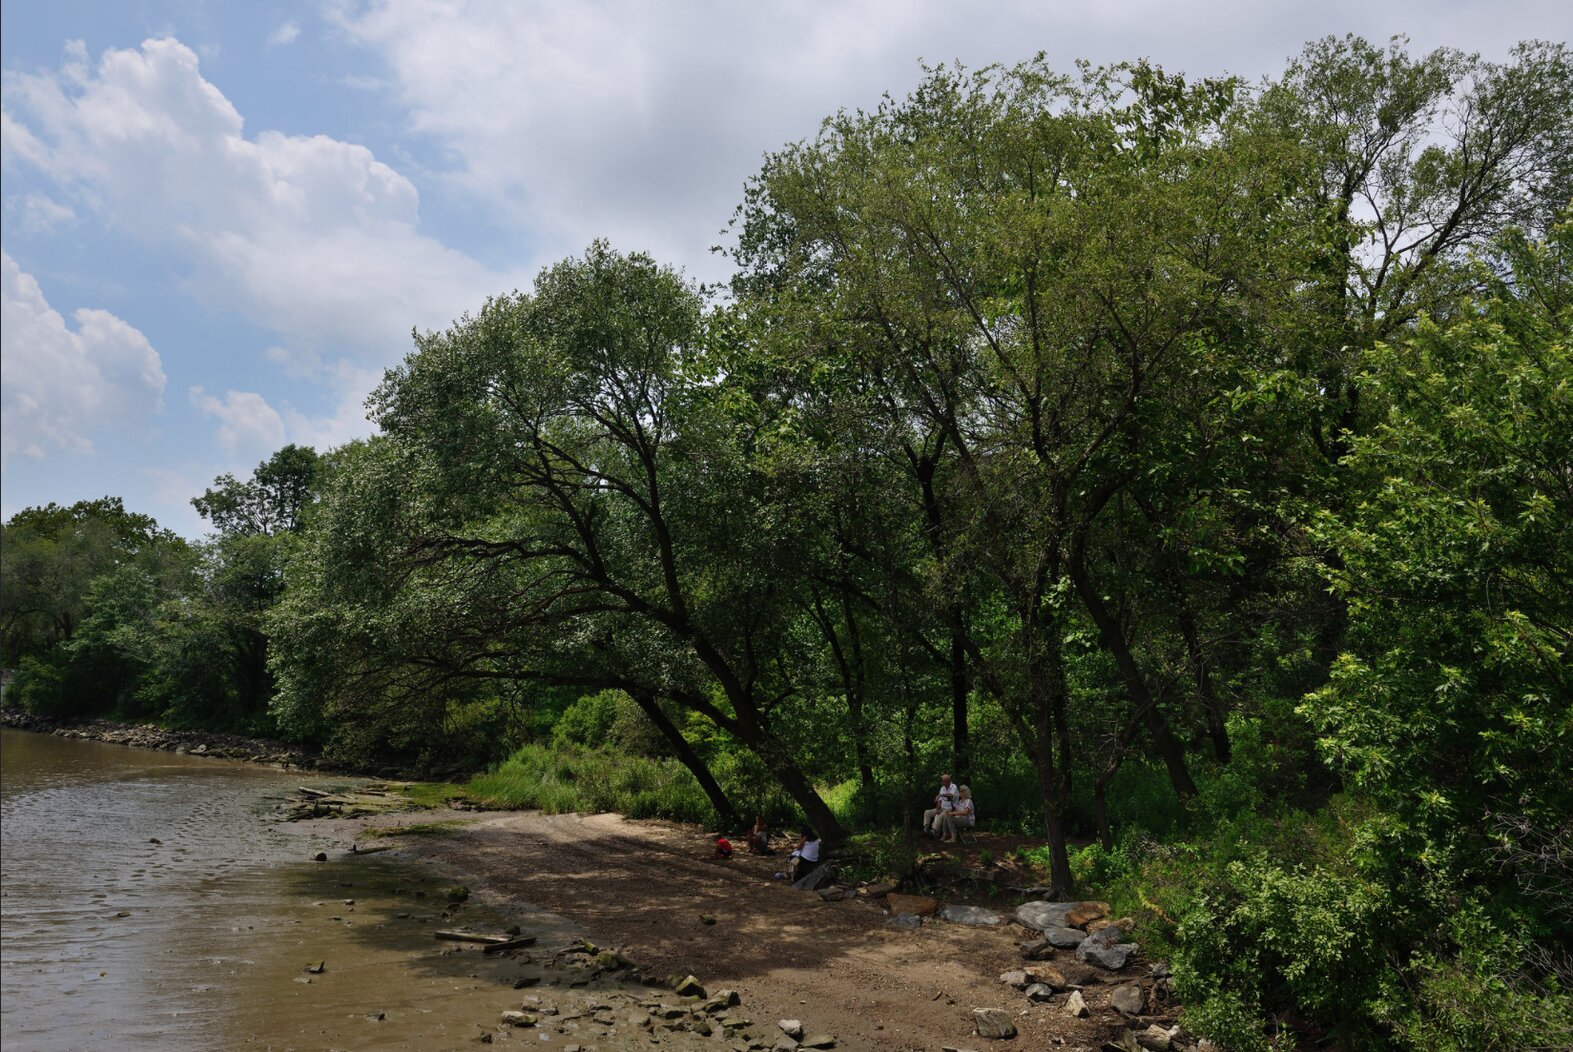 Swindler Cove Park’s small beach is visited by birds and humans alike. Photo: <a href="https://www.flickr.com/photos/edcnyc/" target="_blank">Eddie Crimmins</a>